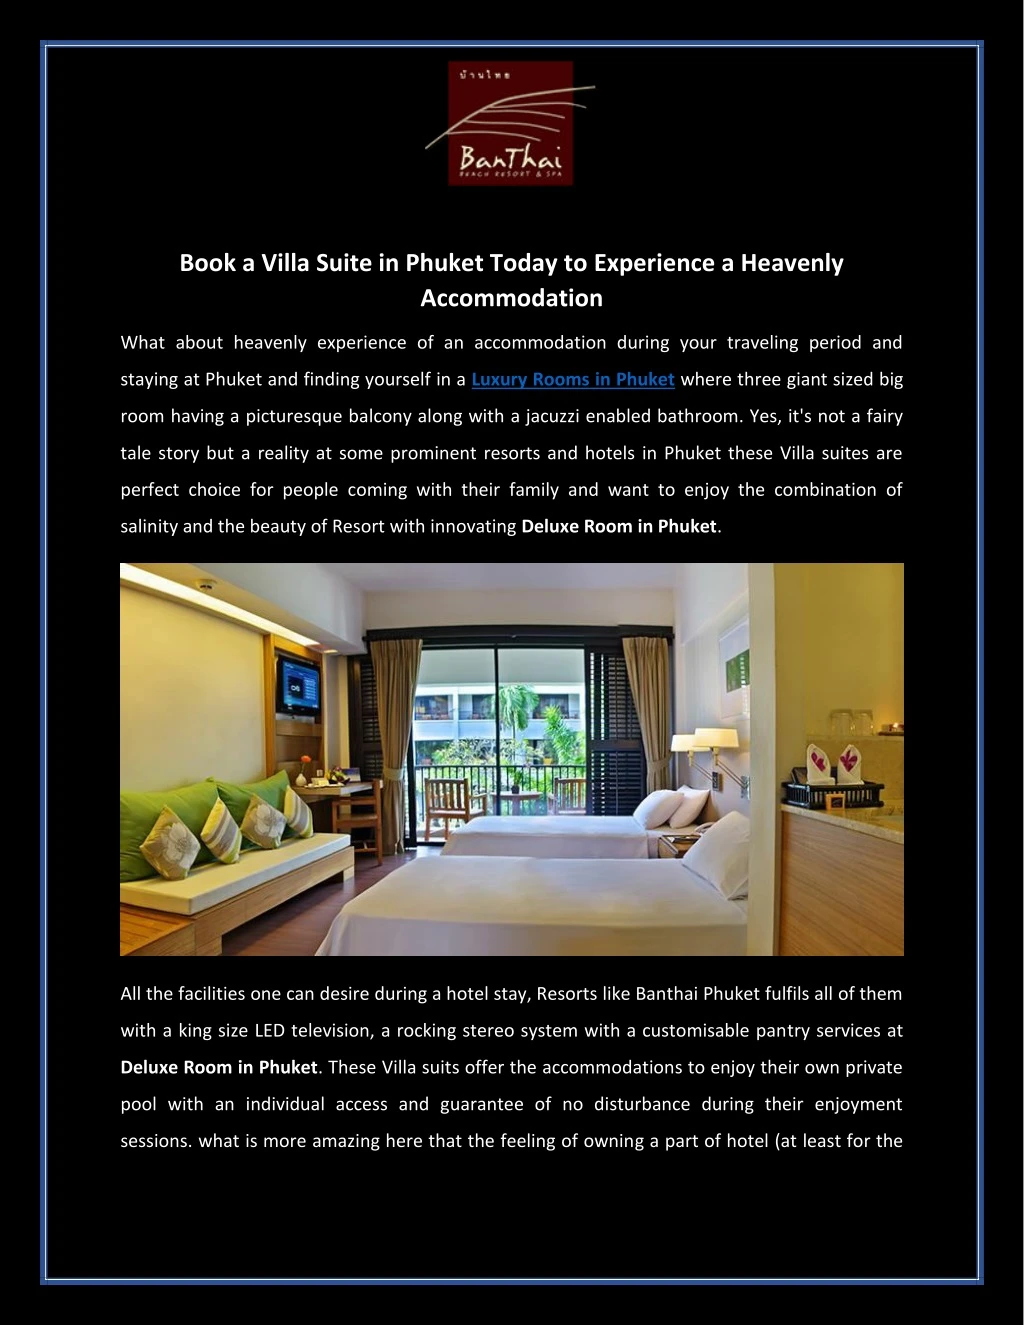 book a villa suite in phuket today to experience